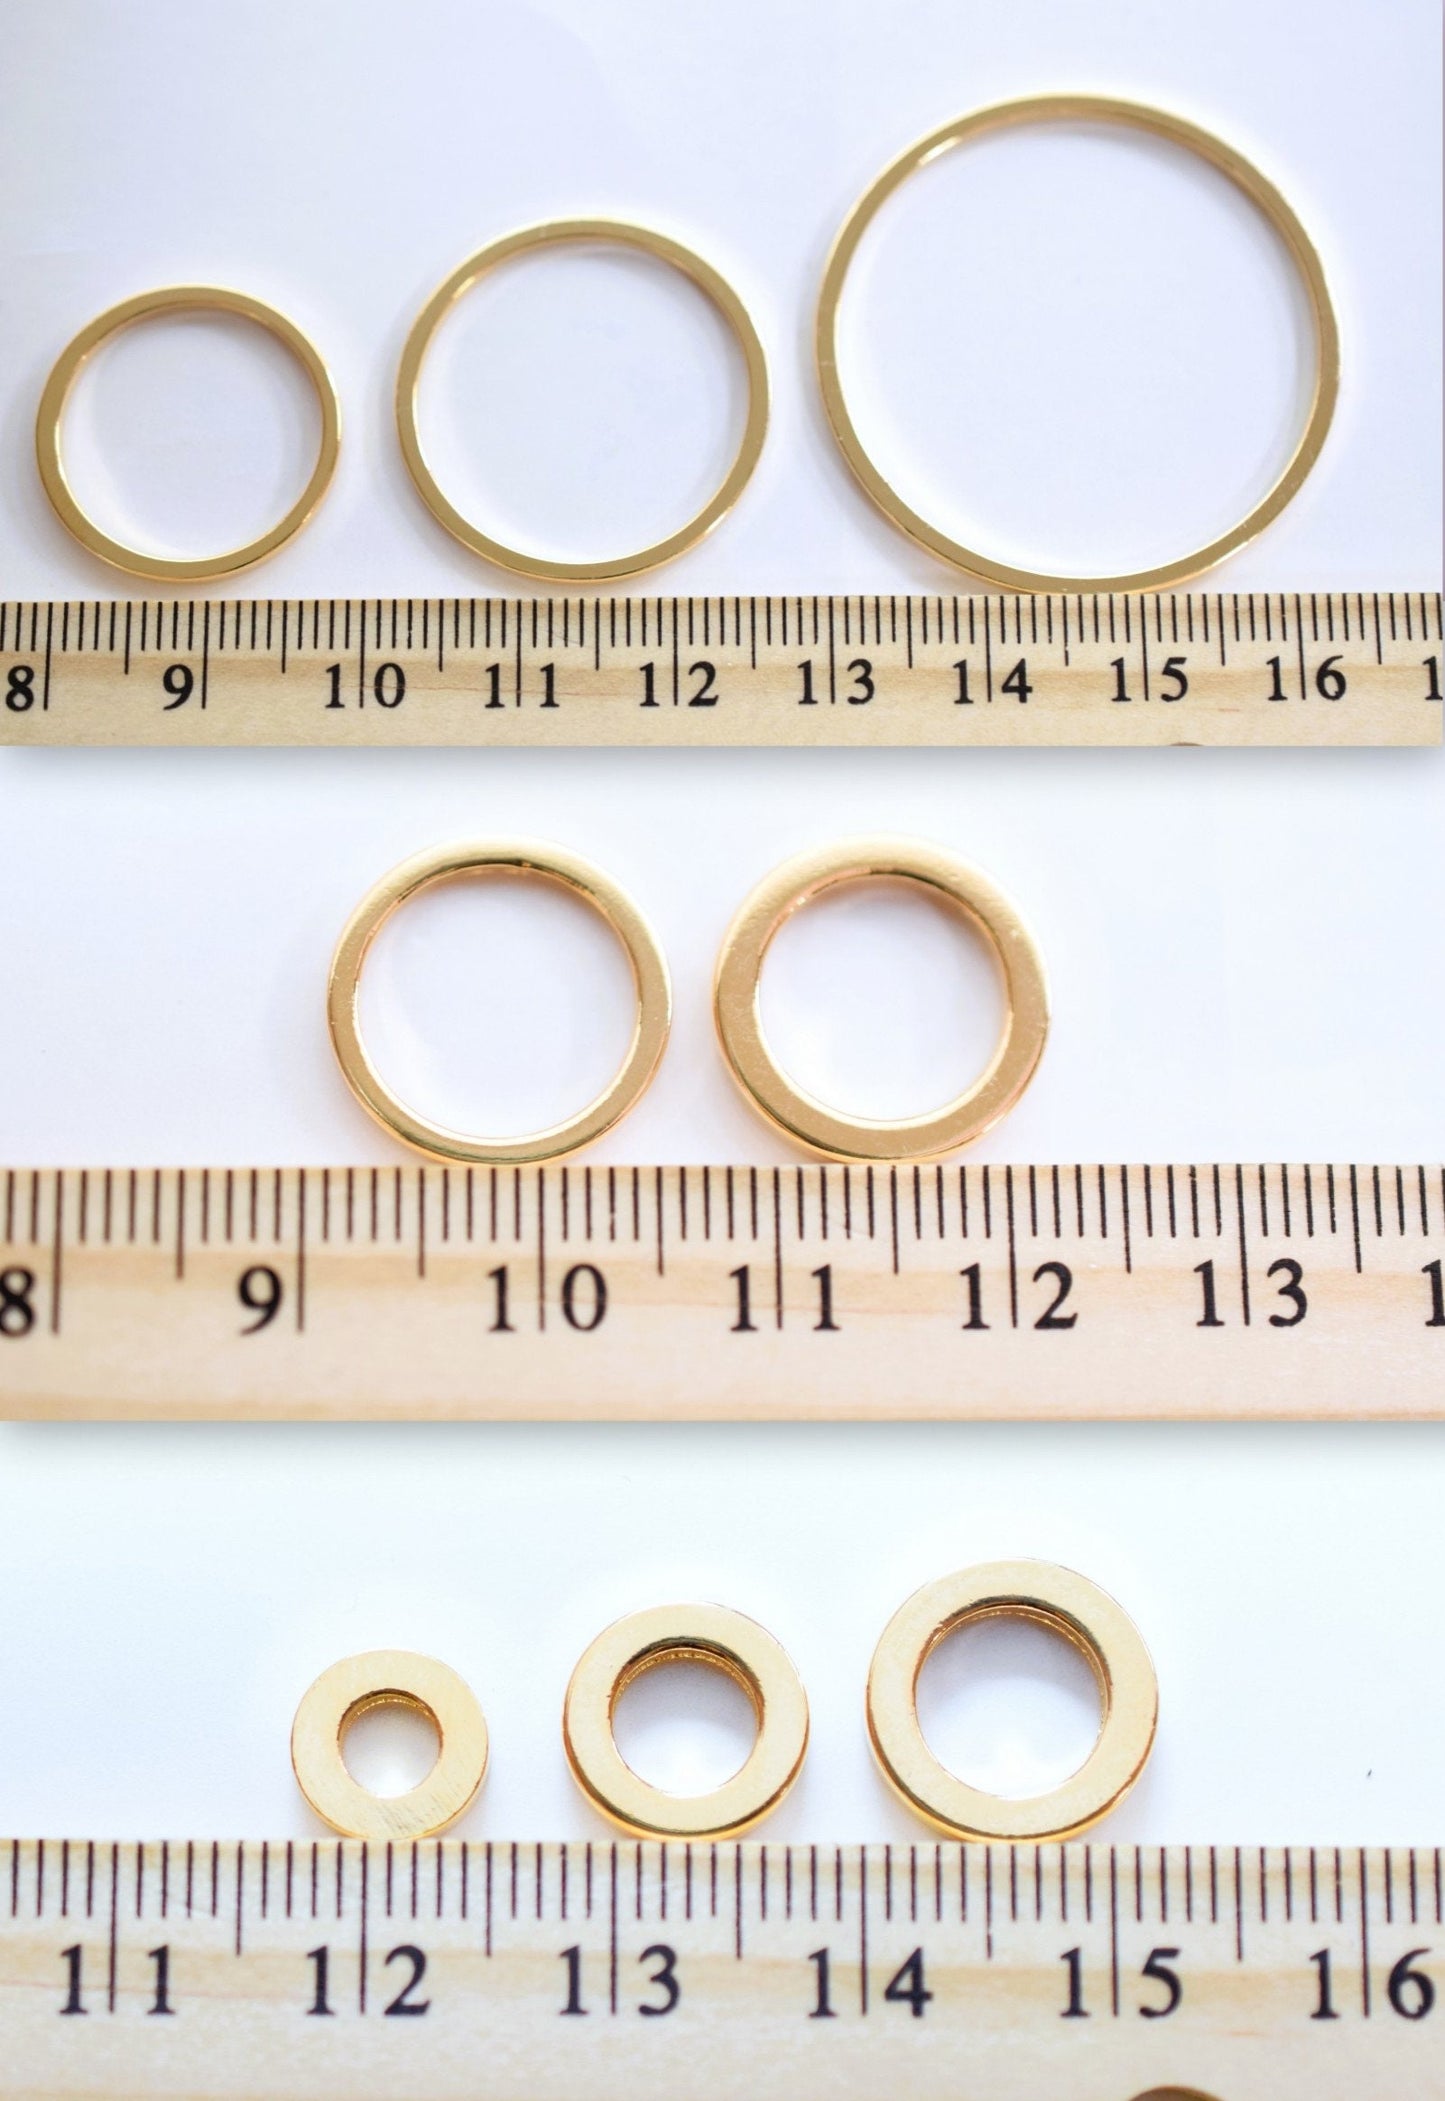 Gold Filled EP Square wire closed jump ring Findings different sizes 8mm/10mm/12mm/15mm/20mm/25mm/35mm and wholesale